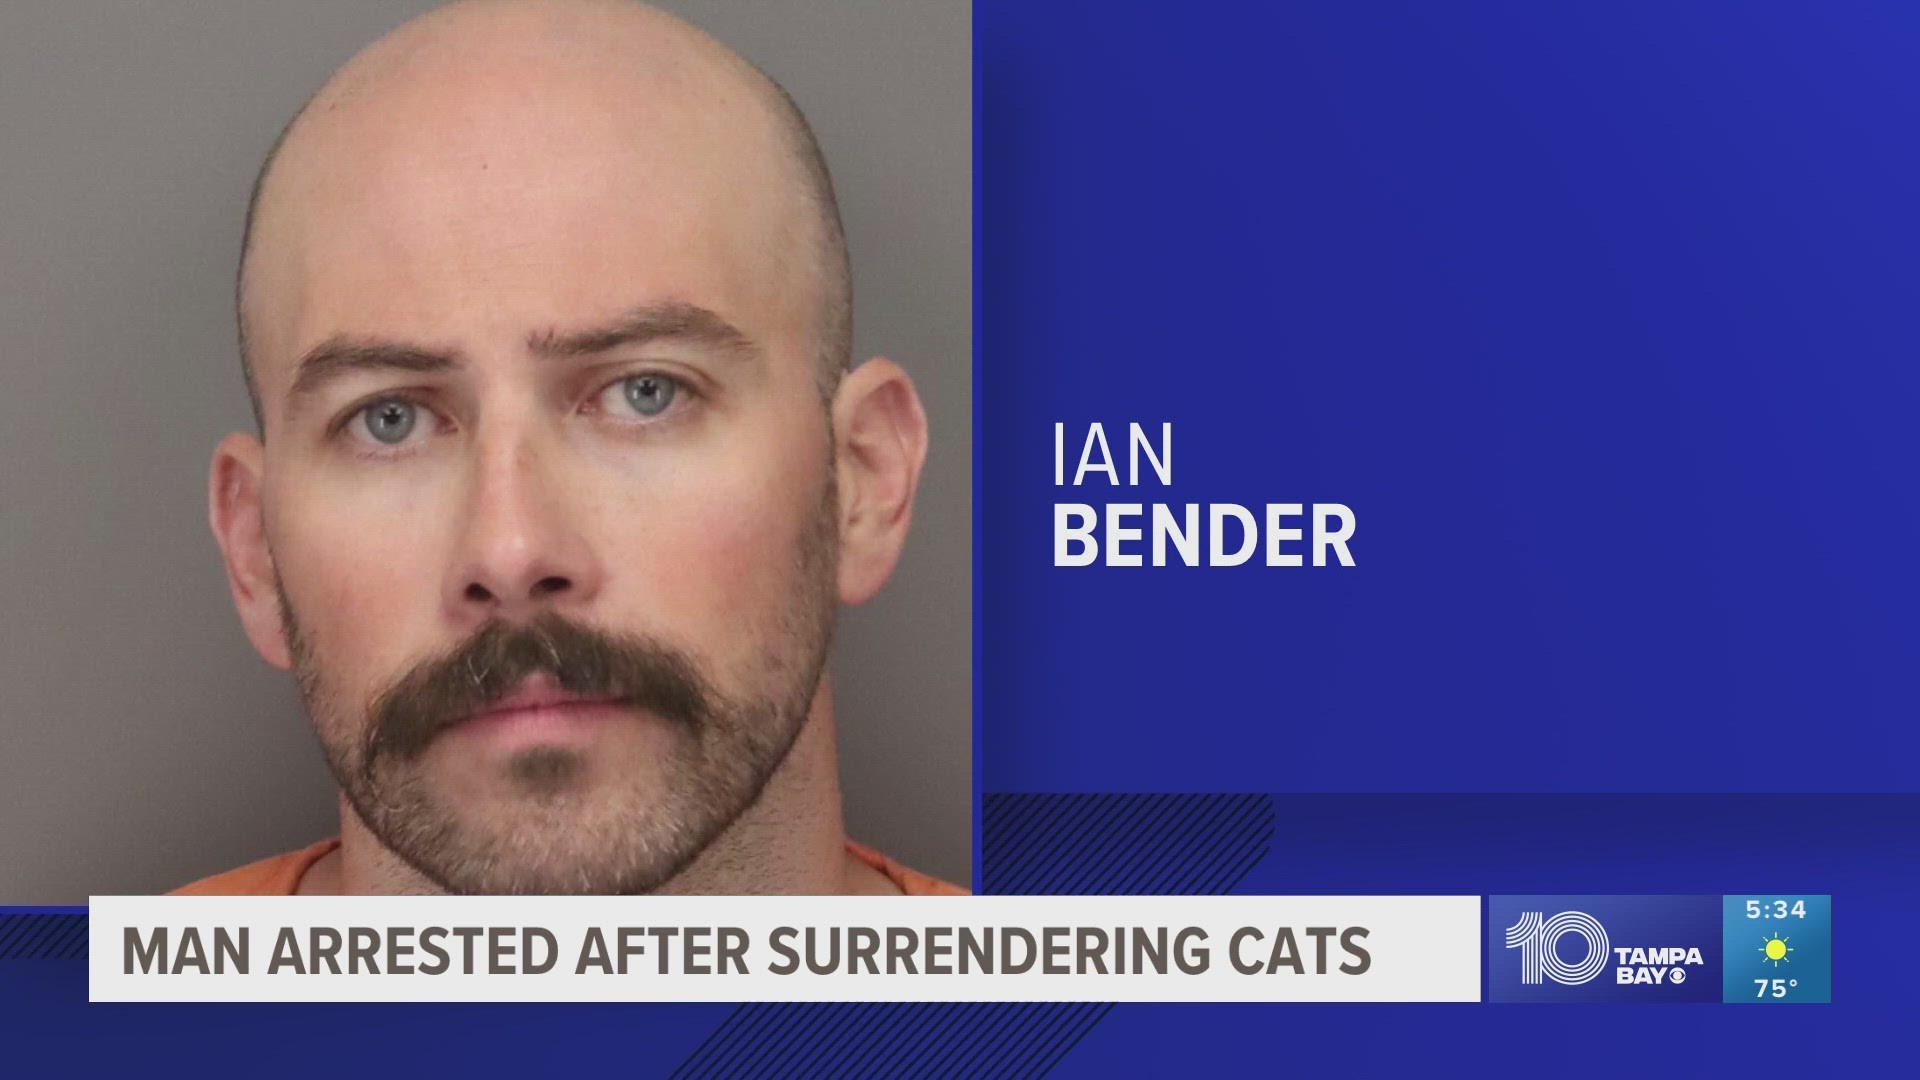 The man, who had been caring for his friend's seven cats, said he was “sick of caring for them,” according to a Pinellas County Sheriff’s Office news release.